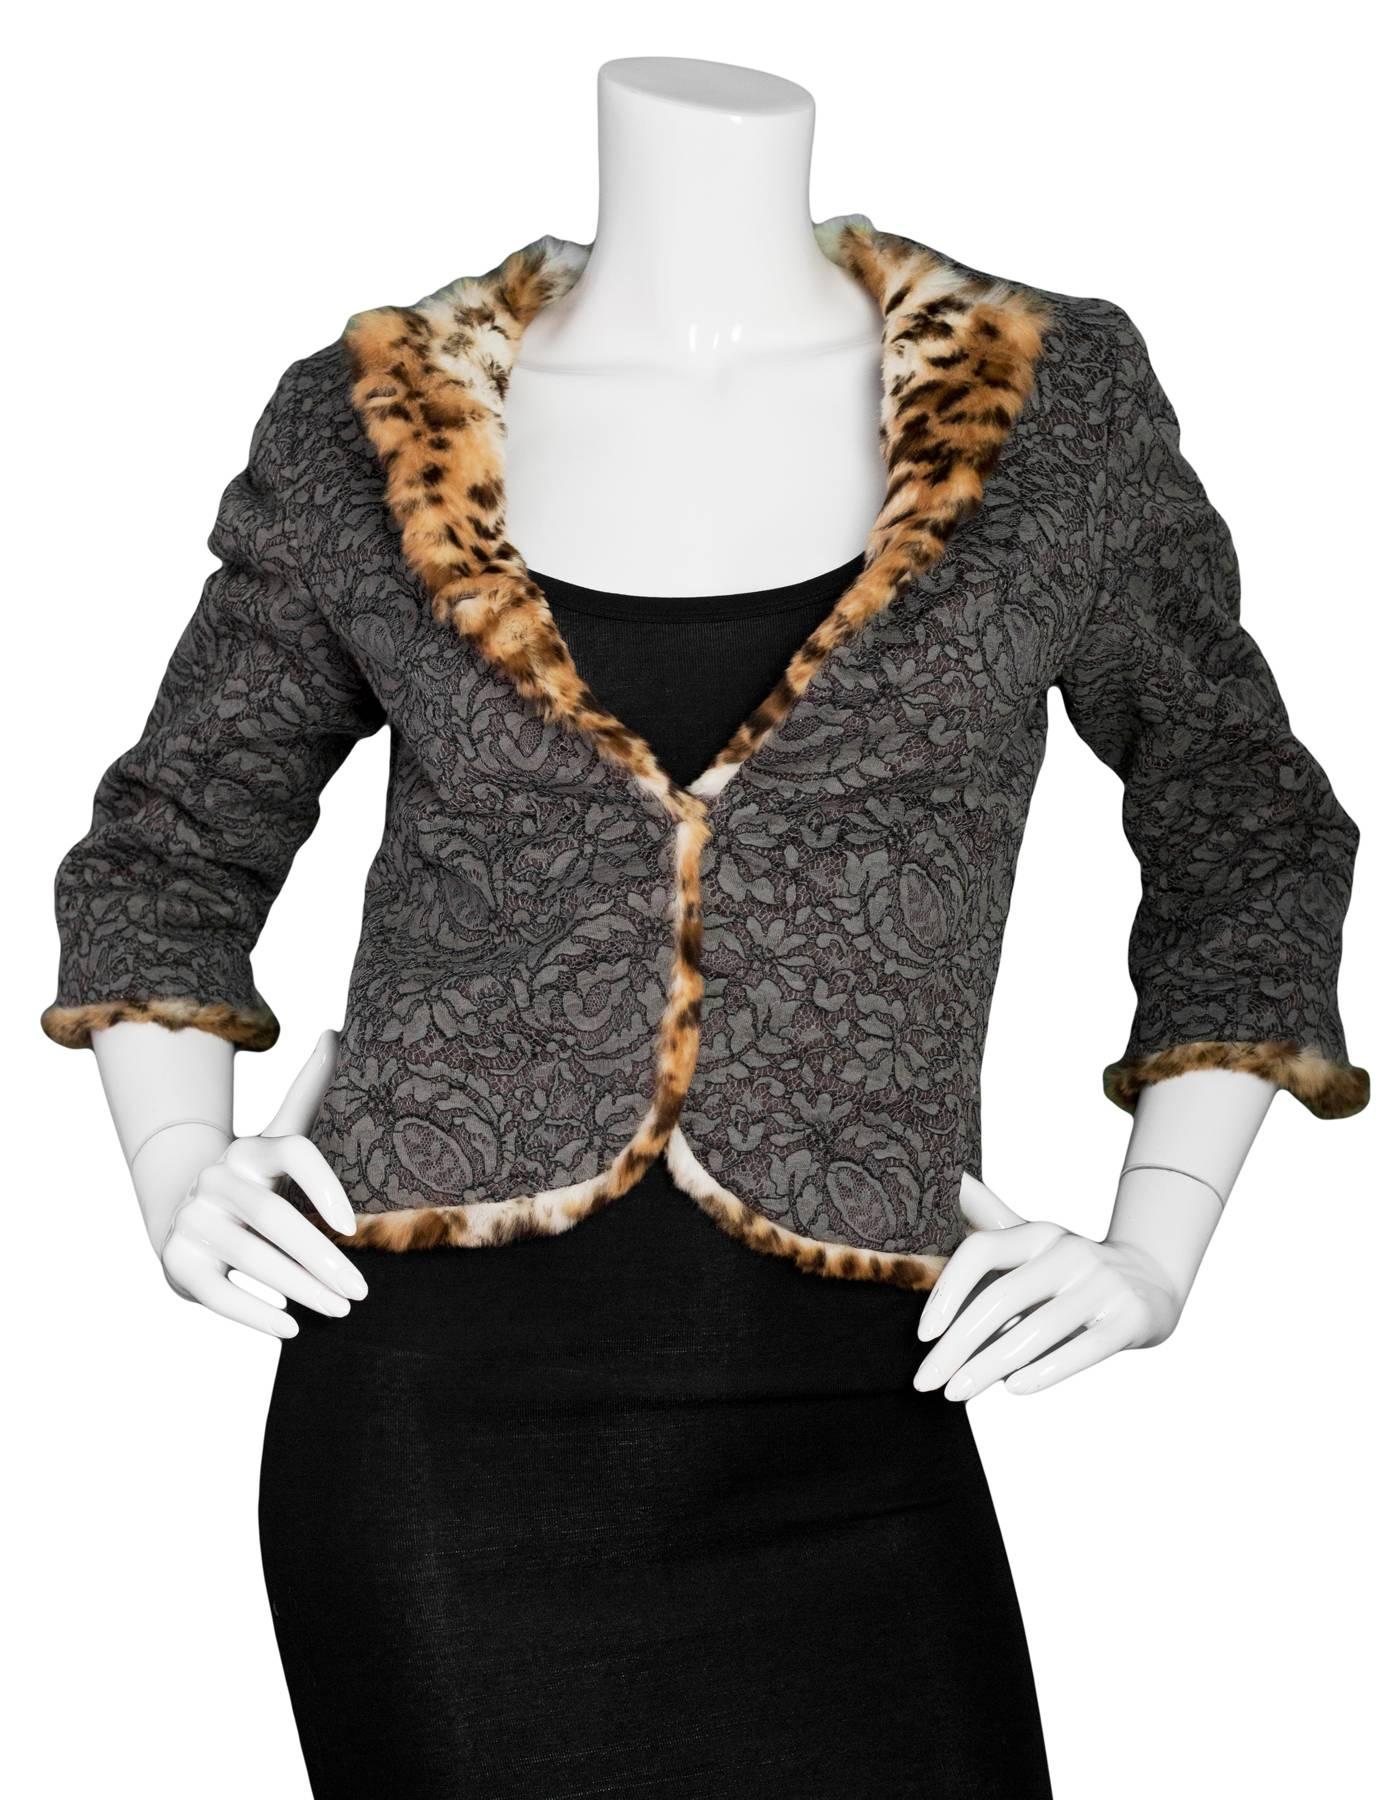 Tuleh Taupe Lace Jacket with Leopard Print Rabbit Trim Sz 6
Features leopard print rabbit fur interior lining

Made In: USA
Color: Taupe
Composition: 80% Cotton, 20% nylon
Lining: Rabbit fur
Closure/Opening: Hidden hook and eyes
Exterior Pockets: